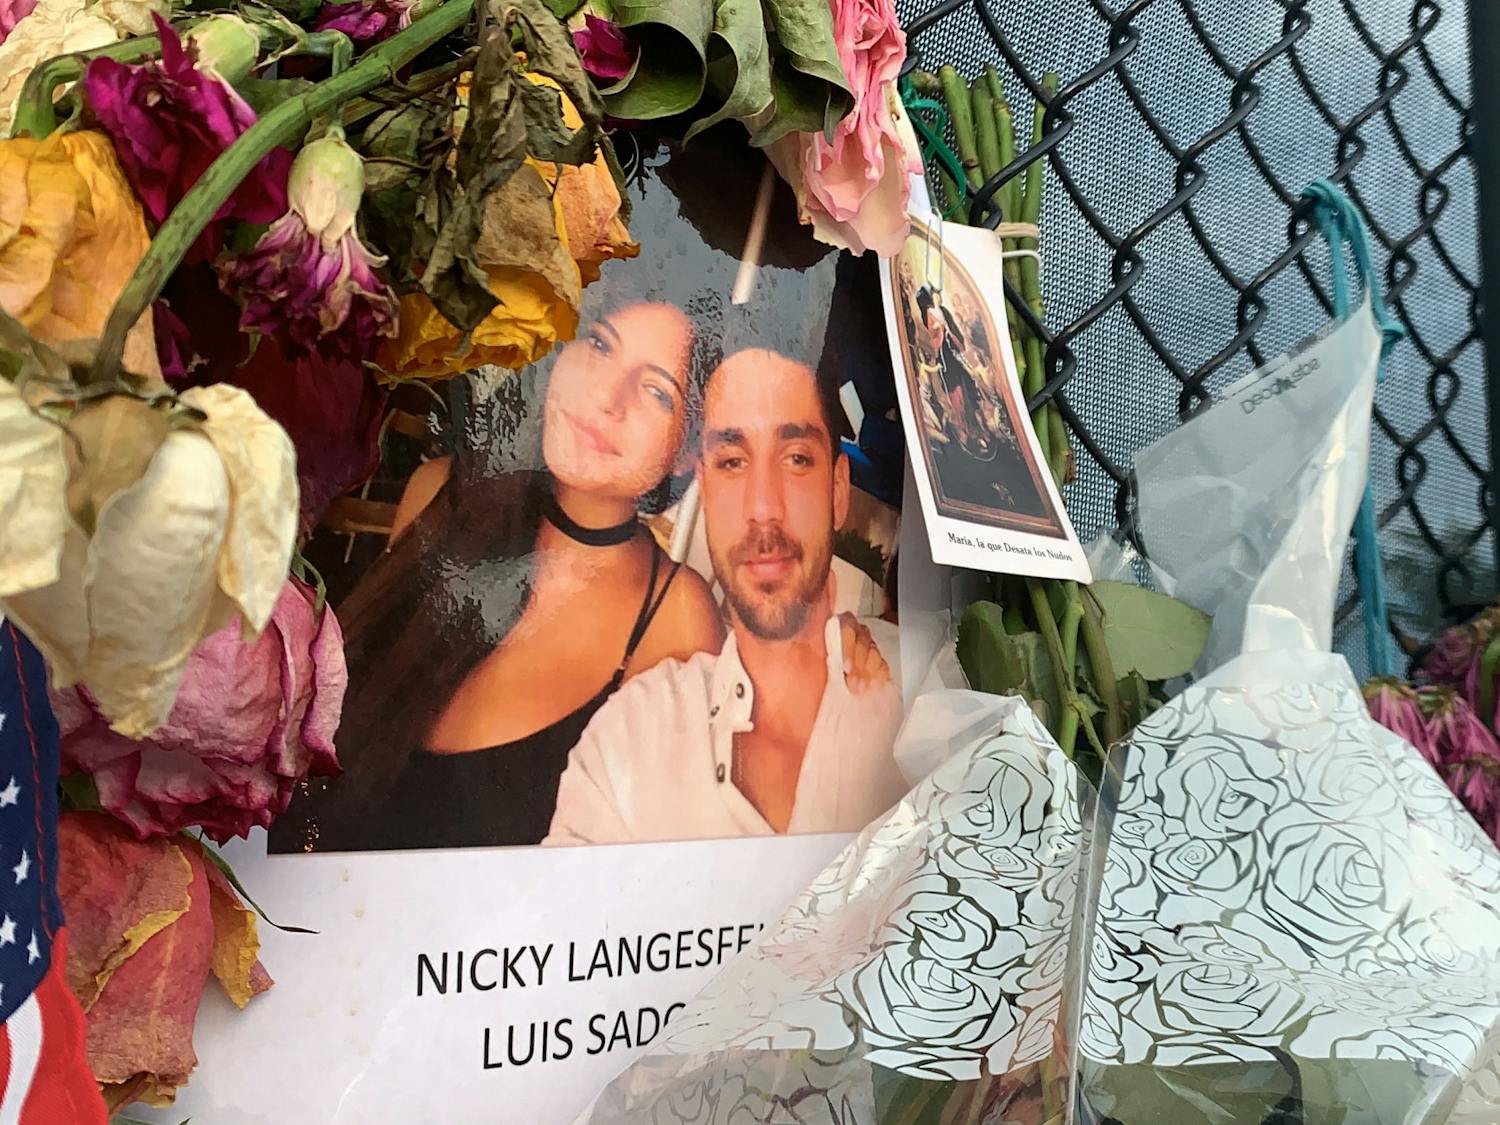 A photo of Nicole "Nicky" Langesfeld and Luis Sadovnic hangs on a memorial wall in Surfside, Florida on Saturday, July 3, 2021. Langesfeld and Sadovnic are two UF alumni among the more than 100 people still unaccounted for after the partial collapse of the Champlain Towers South building on June 24. 